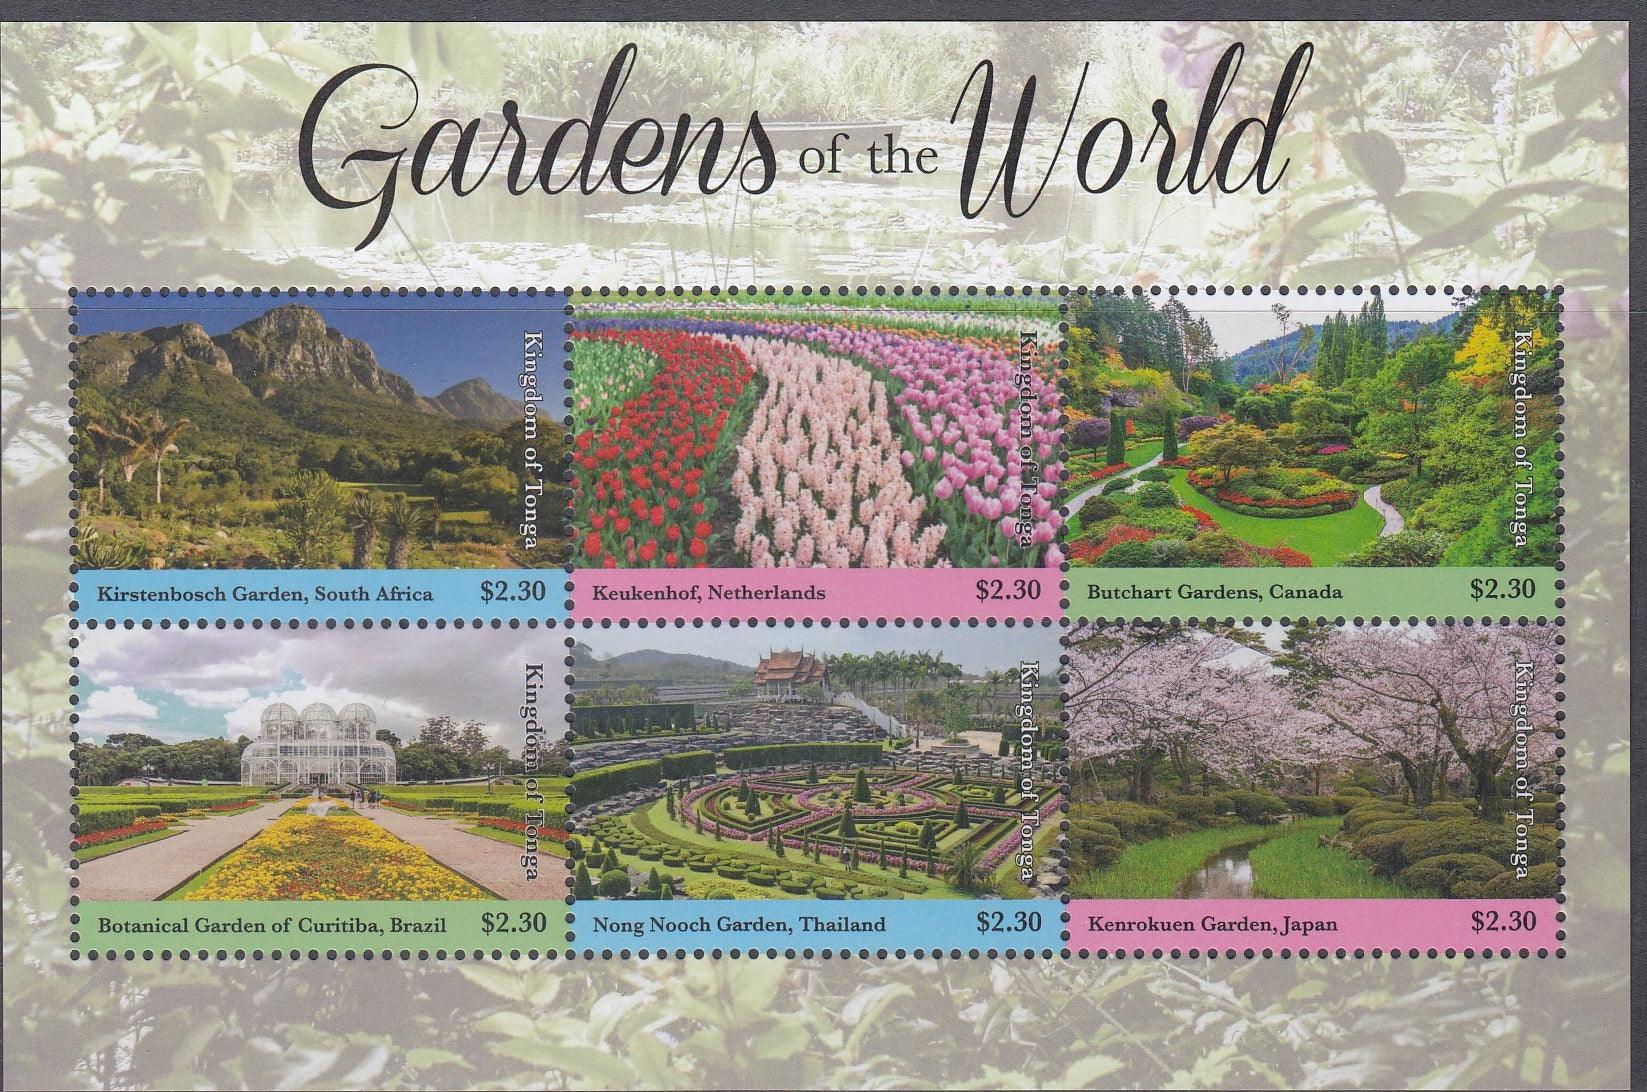 Tonga 2019 - $13.80 Gardens of the World, Miniature Sheet - Mint Unhinged - Loose Change Coins